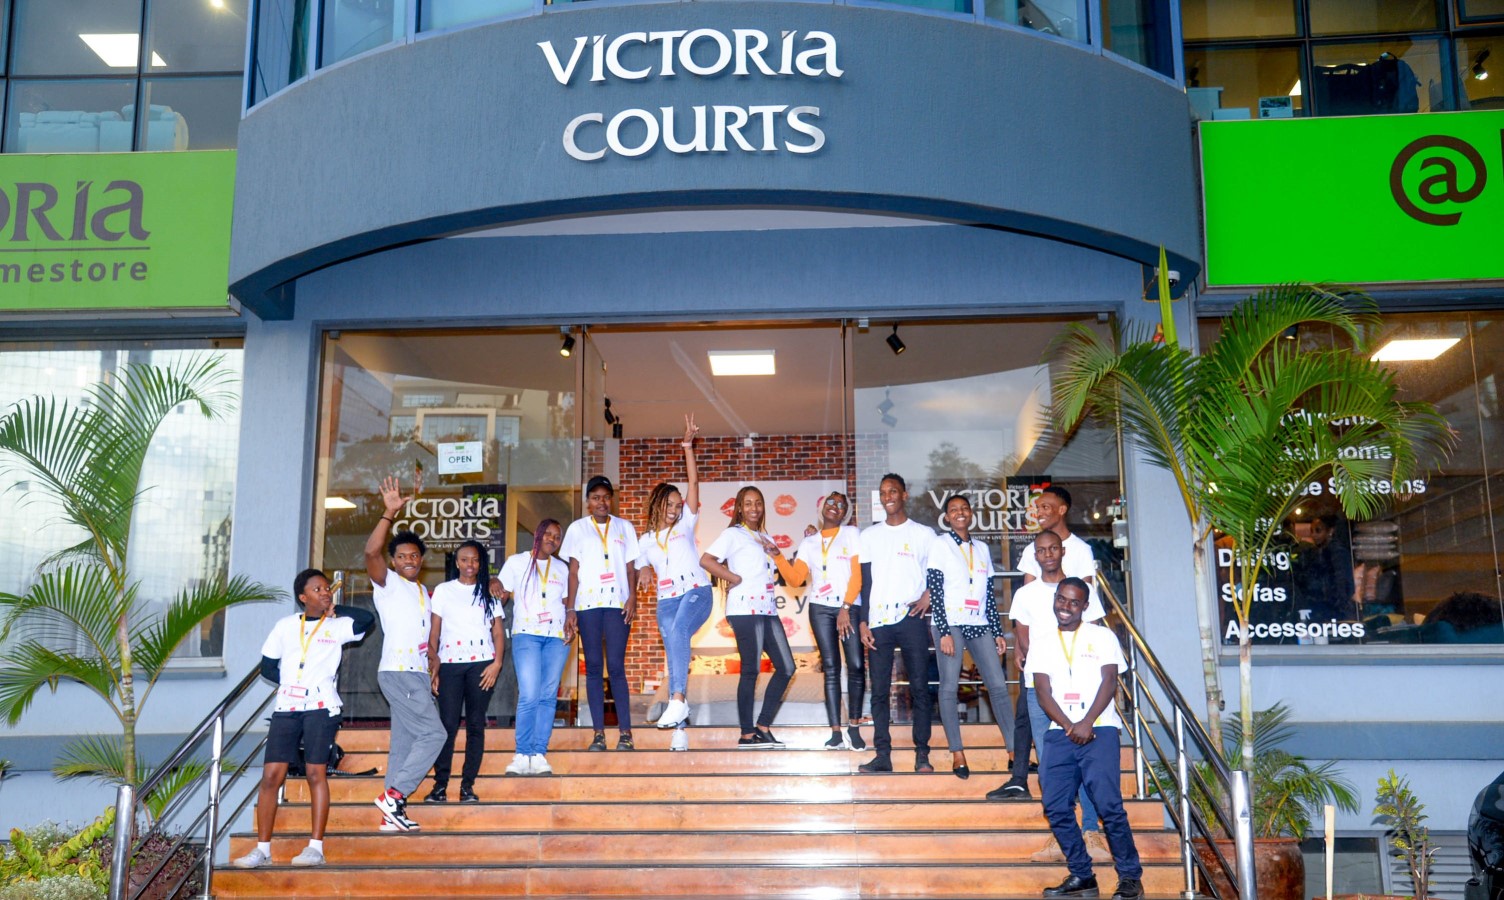 As an Industry Partner, Victoria courts has hosted our students for events and mentorship.